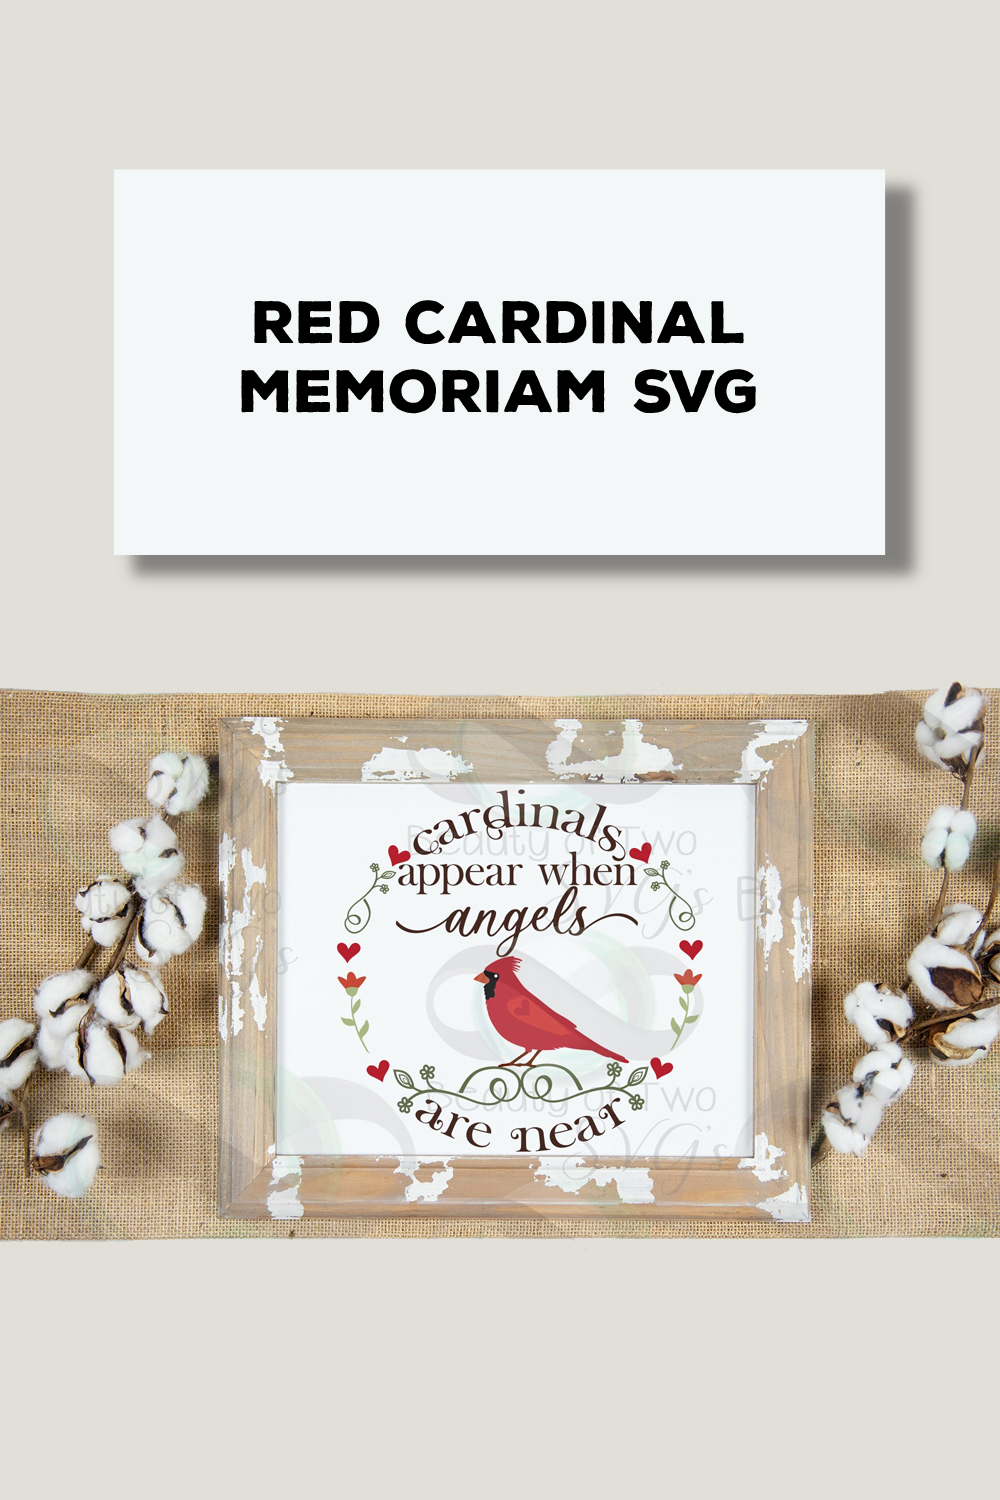 Red cardinal memorial svg with cotton floss.